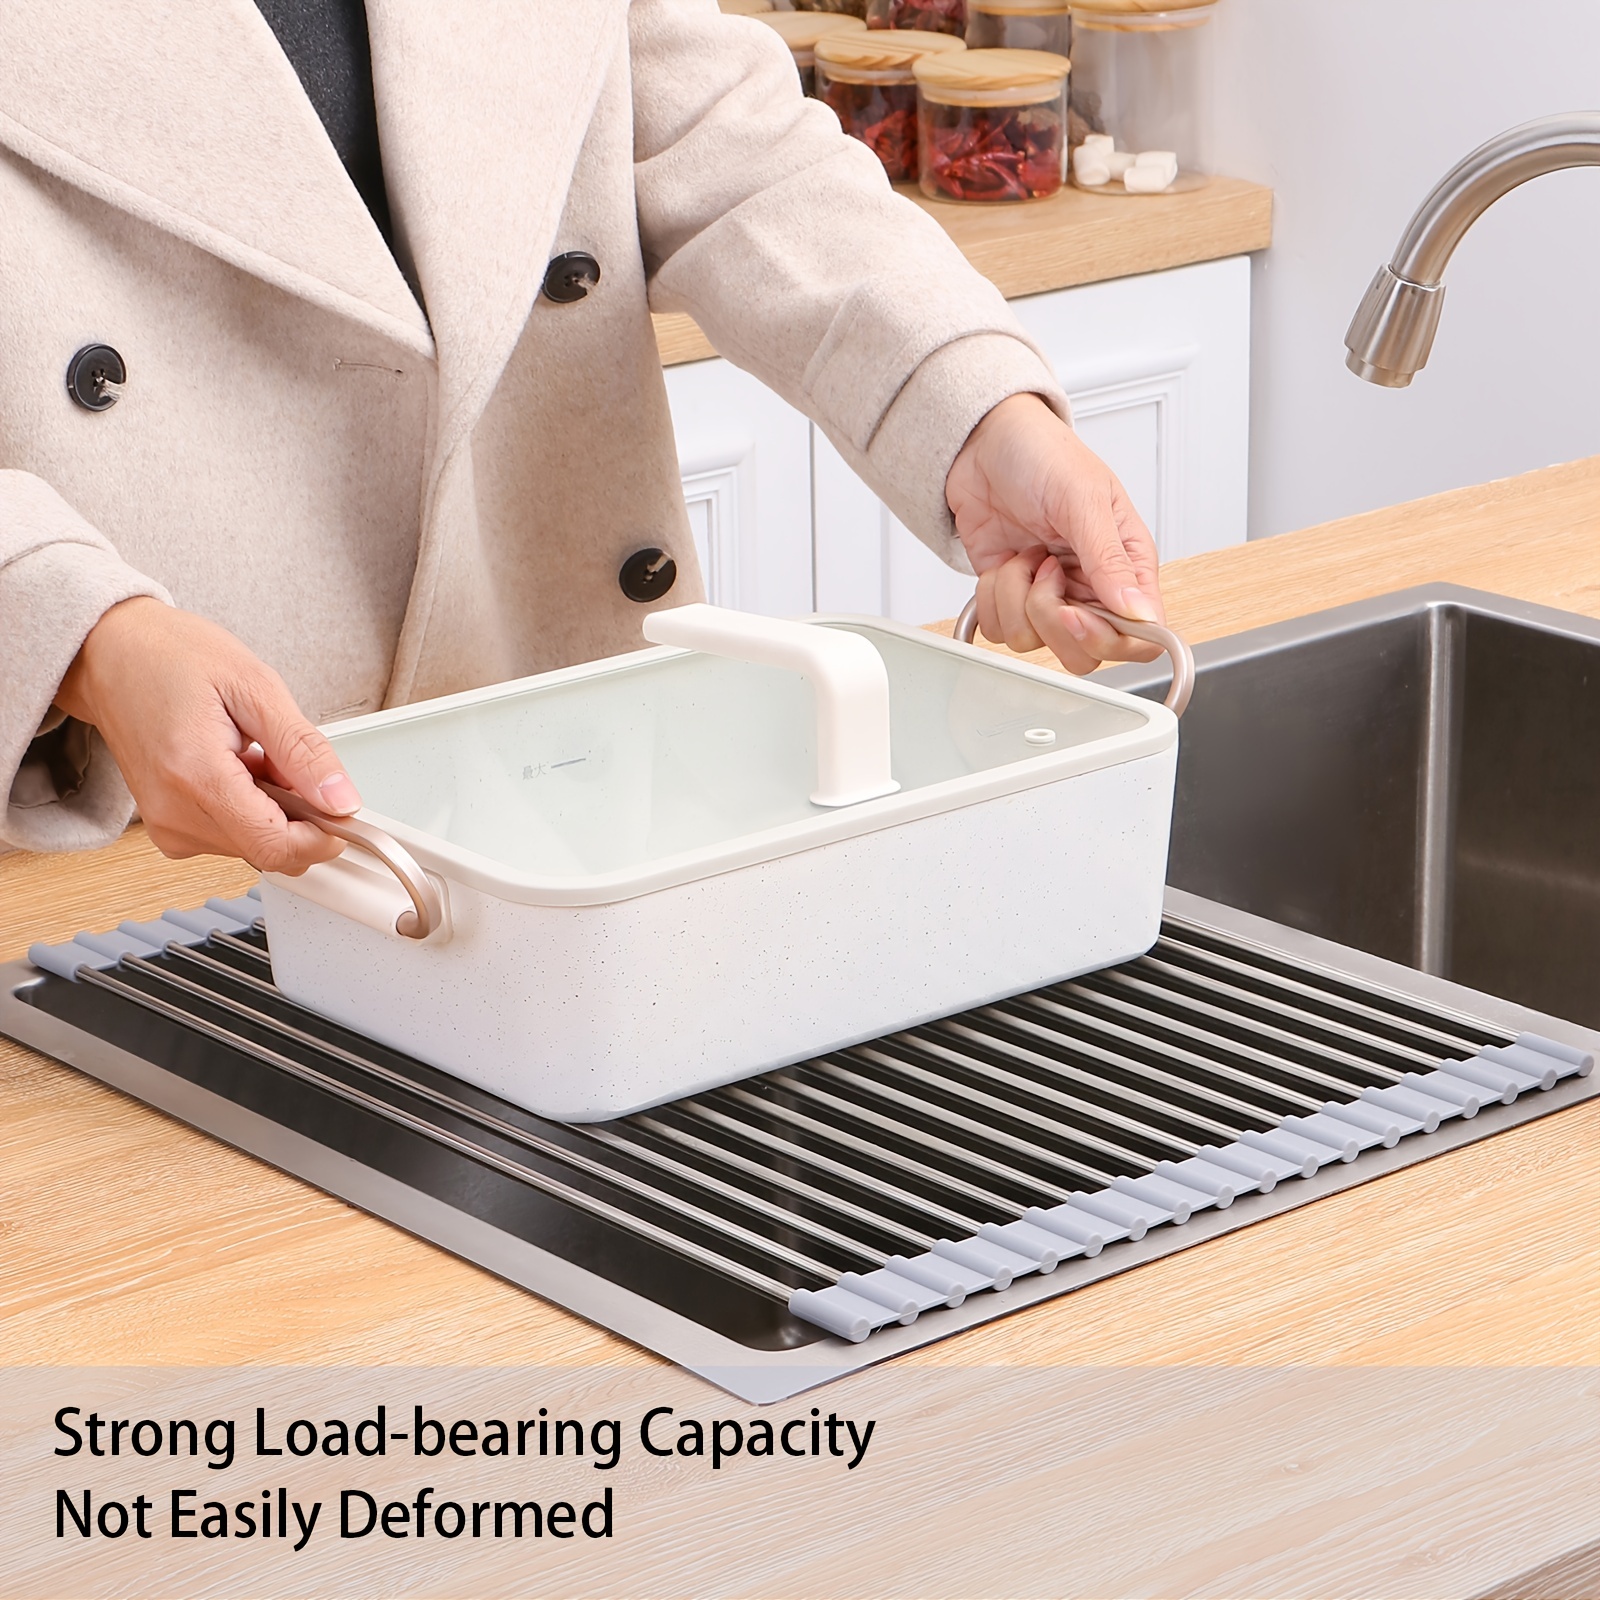 1pc Foldable Dish Drying Rack - Multi-Purpose Sink Drain Rack for Kitchen -  Easy to Roll and Store - Kitchen Tools